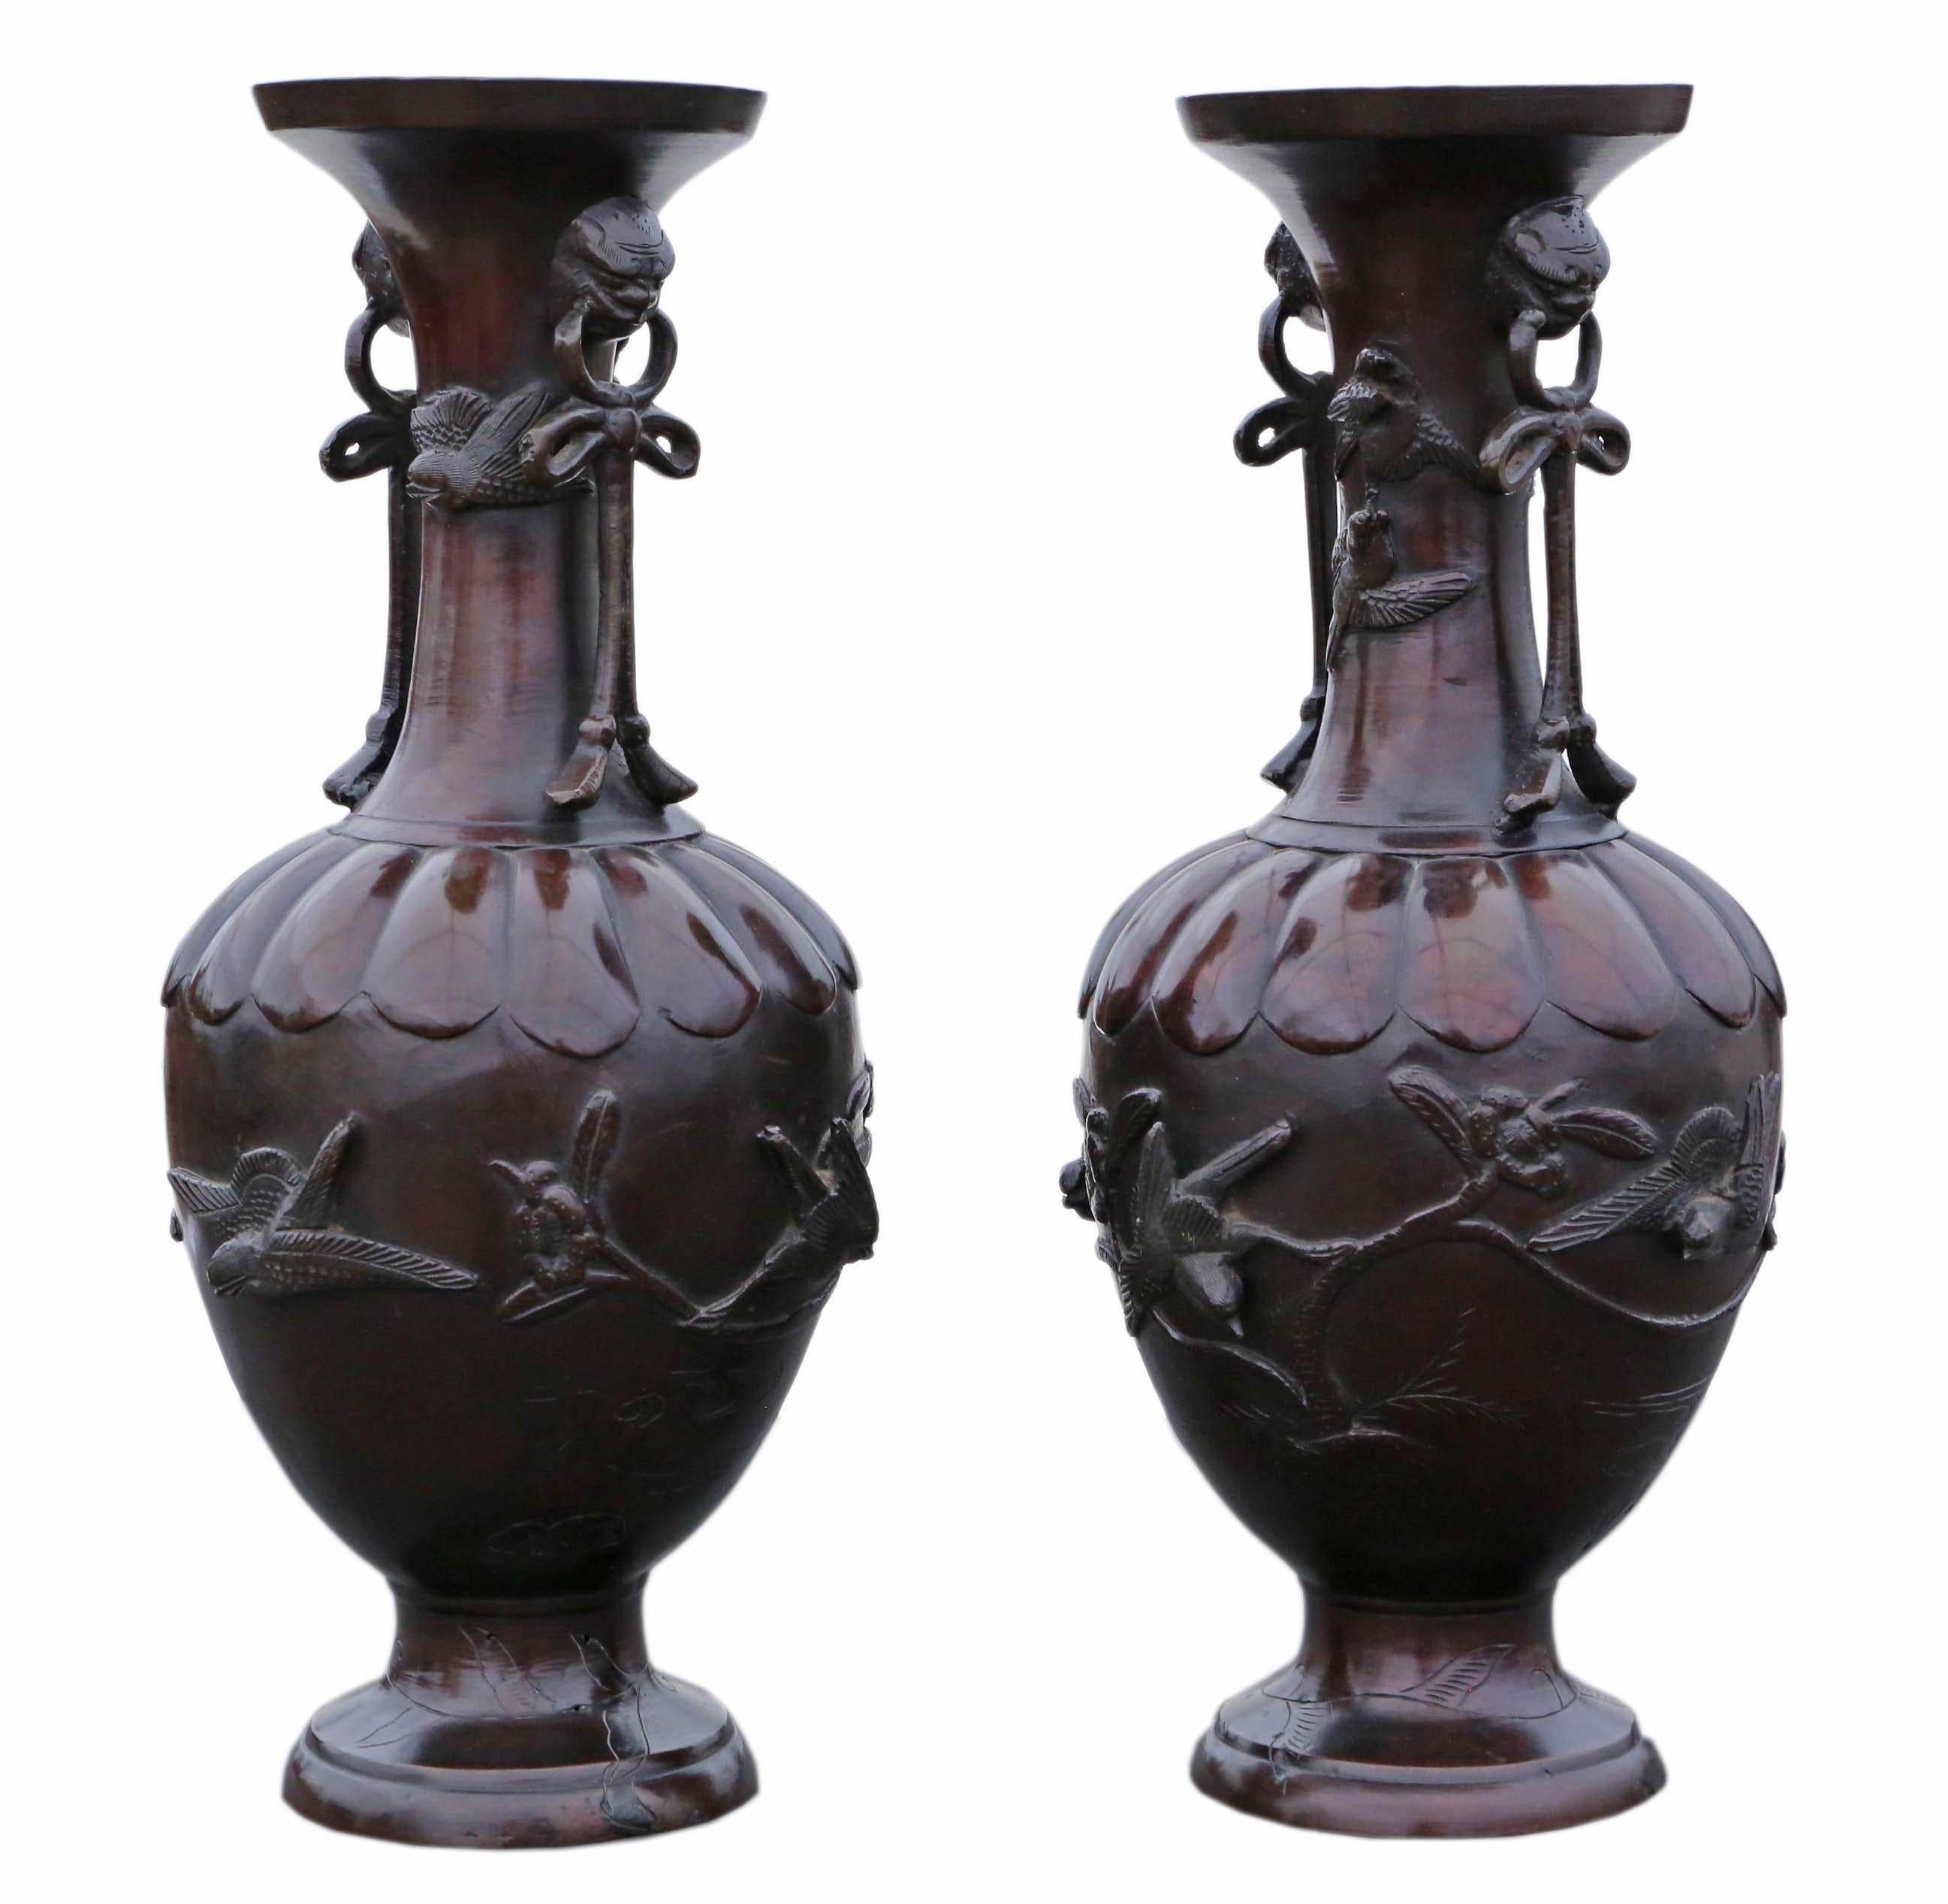 Antique Very Large Pair of Japanese Bronze Vases - Exquisite Meiji Period Presentation Pieces!

These magnificent Japanese bronze vases, dating back to the Meiji Period and dated 1903, are exceptional examples of craftsmanship and history. Each vase